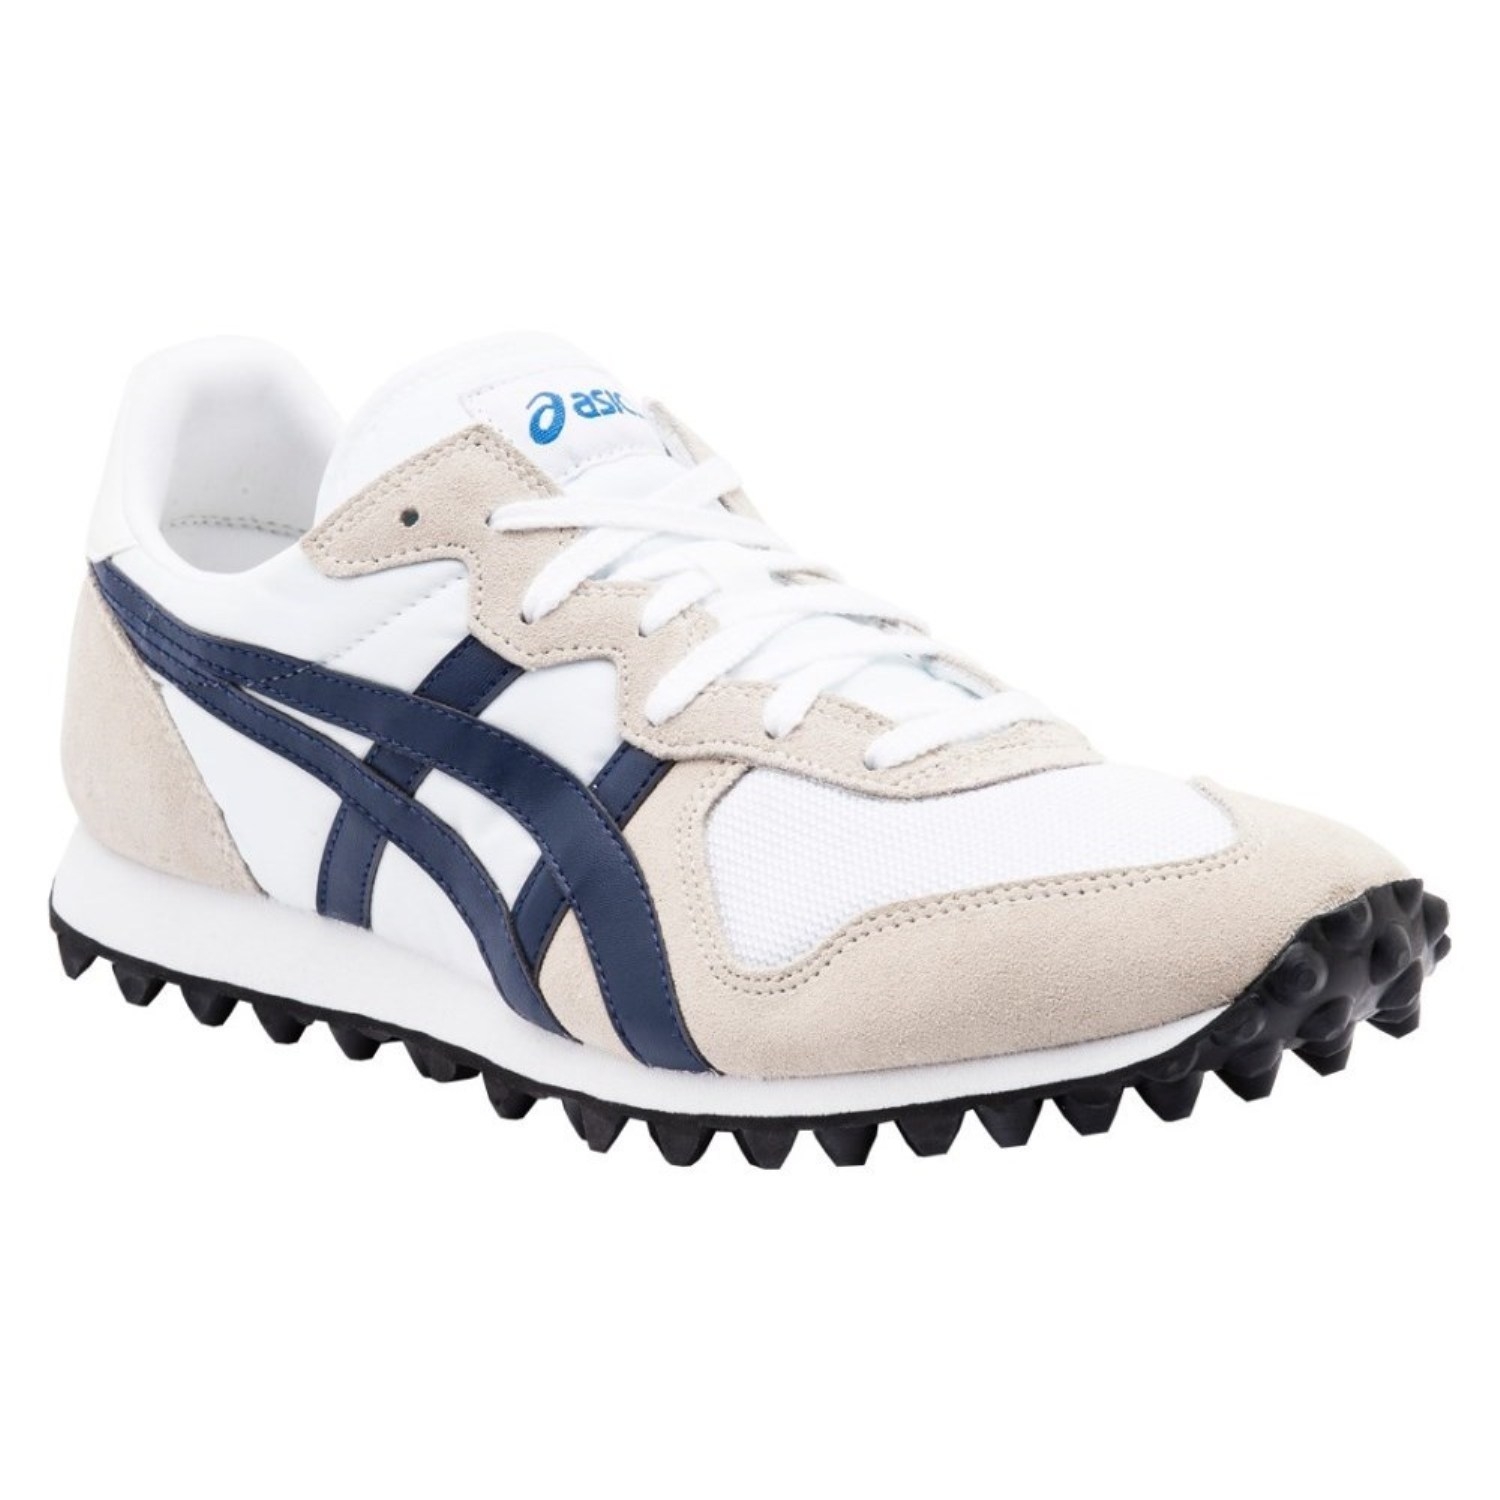 Asics Tiger Touch Football Shoes: White 